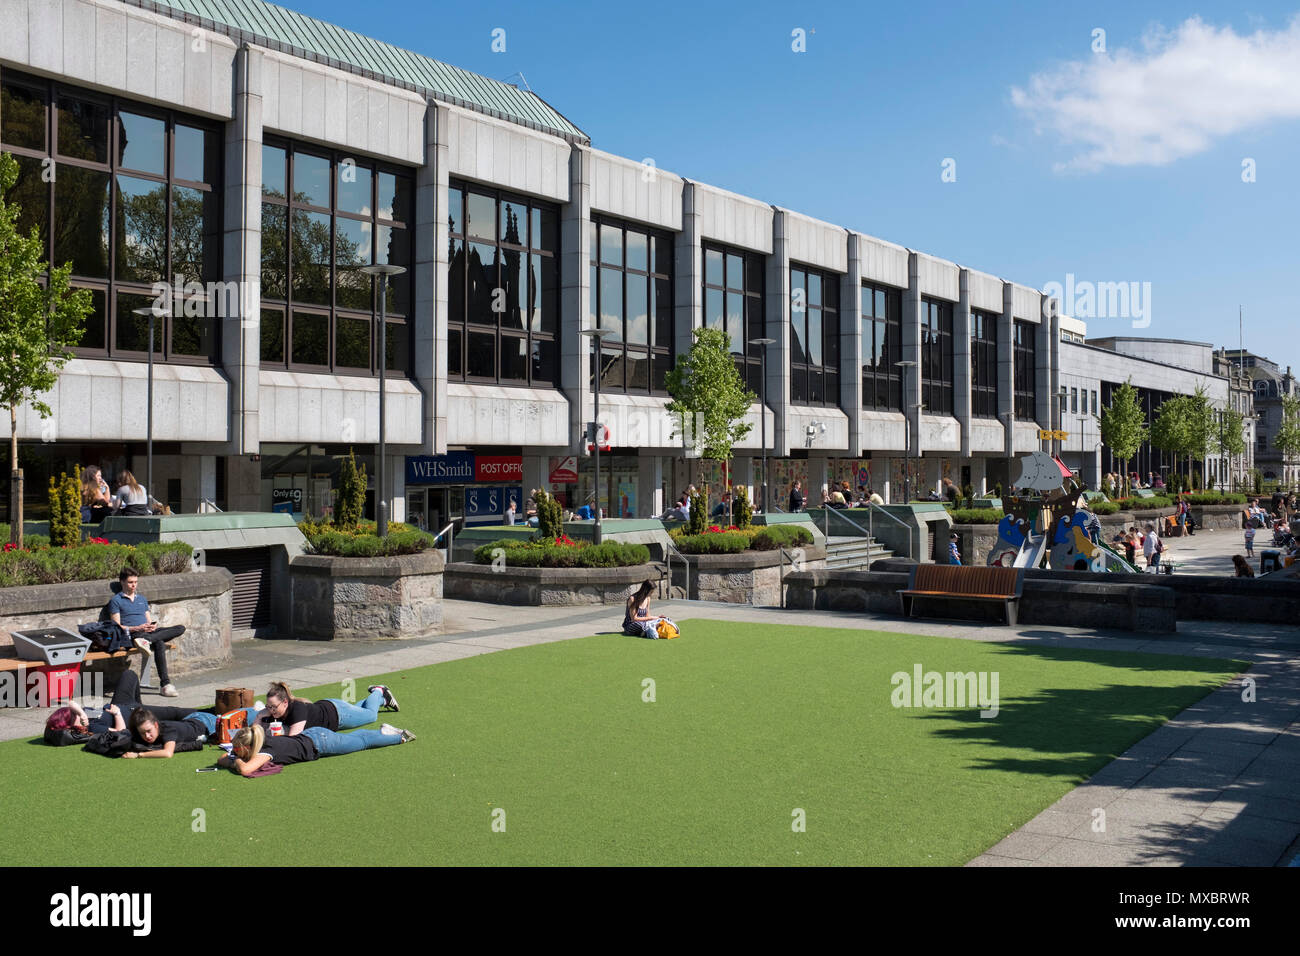 dh Roof Gardens outdoors ST NICHOLAS CENTRE ABERDEEN Scotland People relaxing city shopping centre roof top garden public space Stock Photo